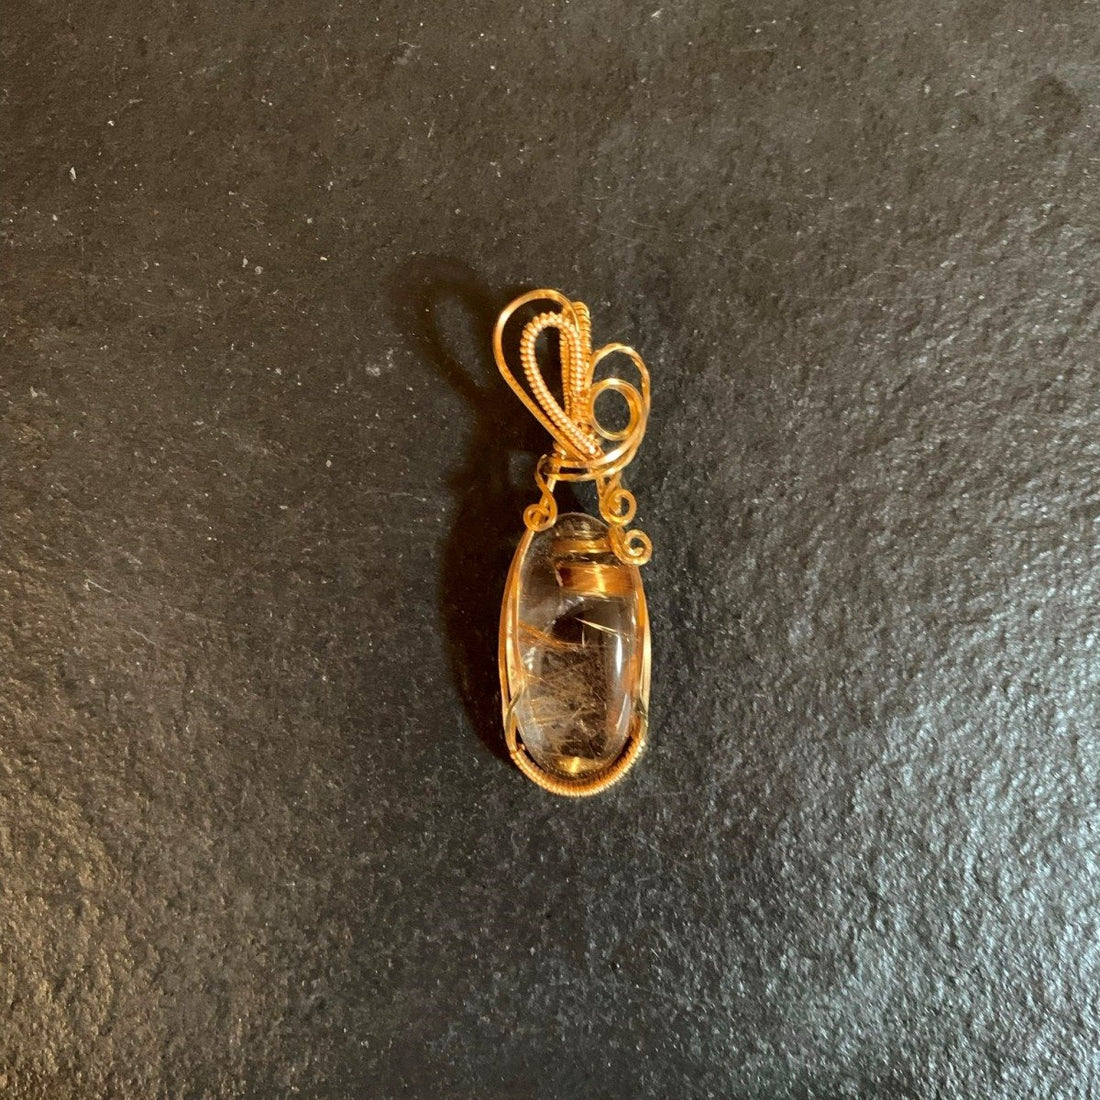 Pendant made of Golden Rutilated Quartz with gold wrap; .75" w x 2 3/8" h, incl bail